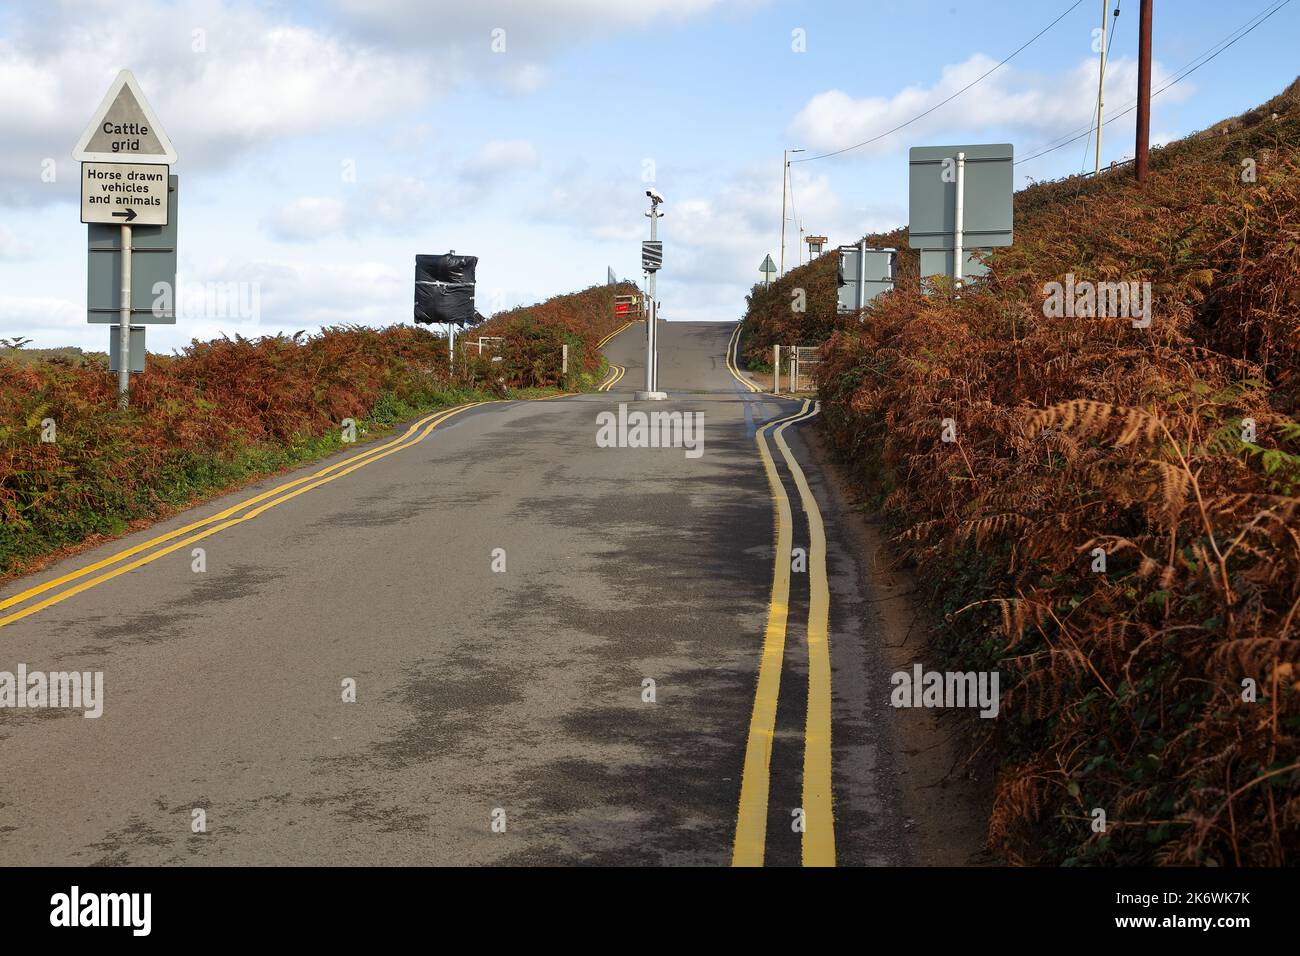 This is the way ahead as cars are controlled coming in allowing a total number of cars on the site as this location this usually full to overflowing. Stock Photo